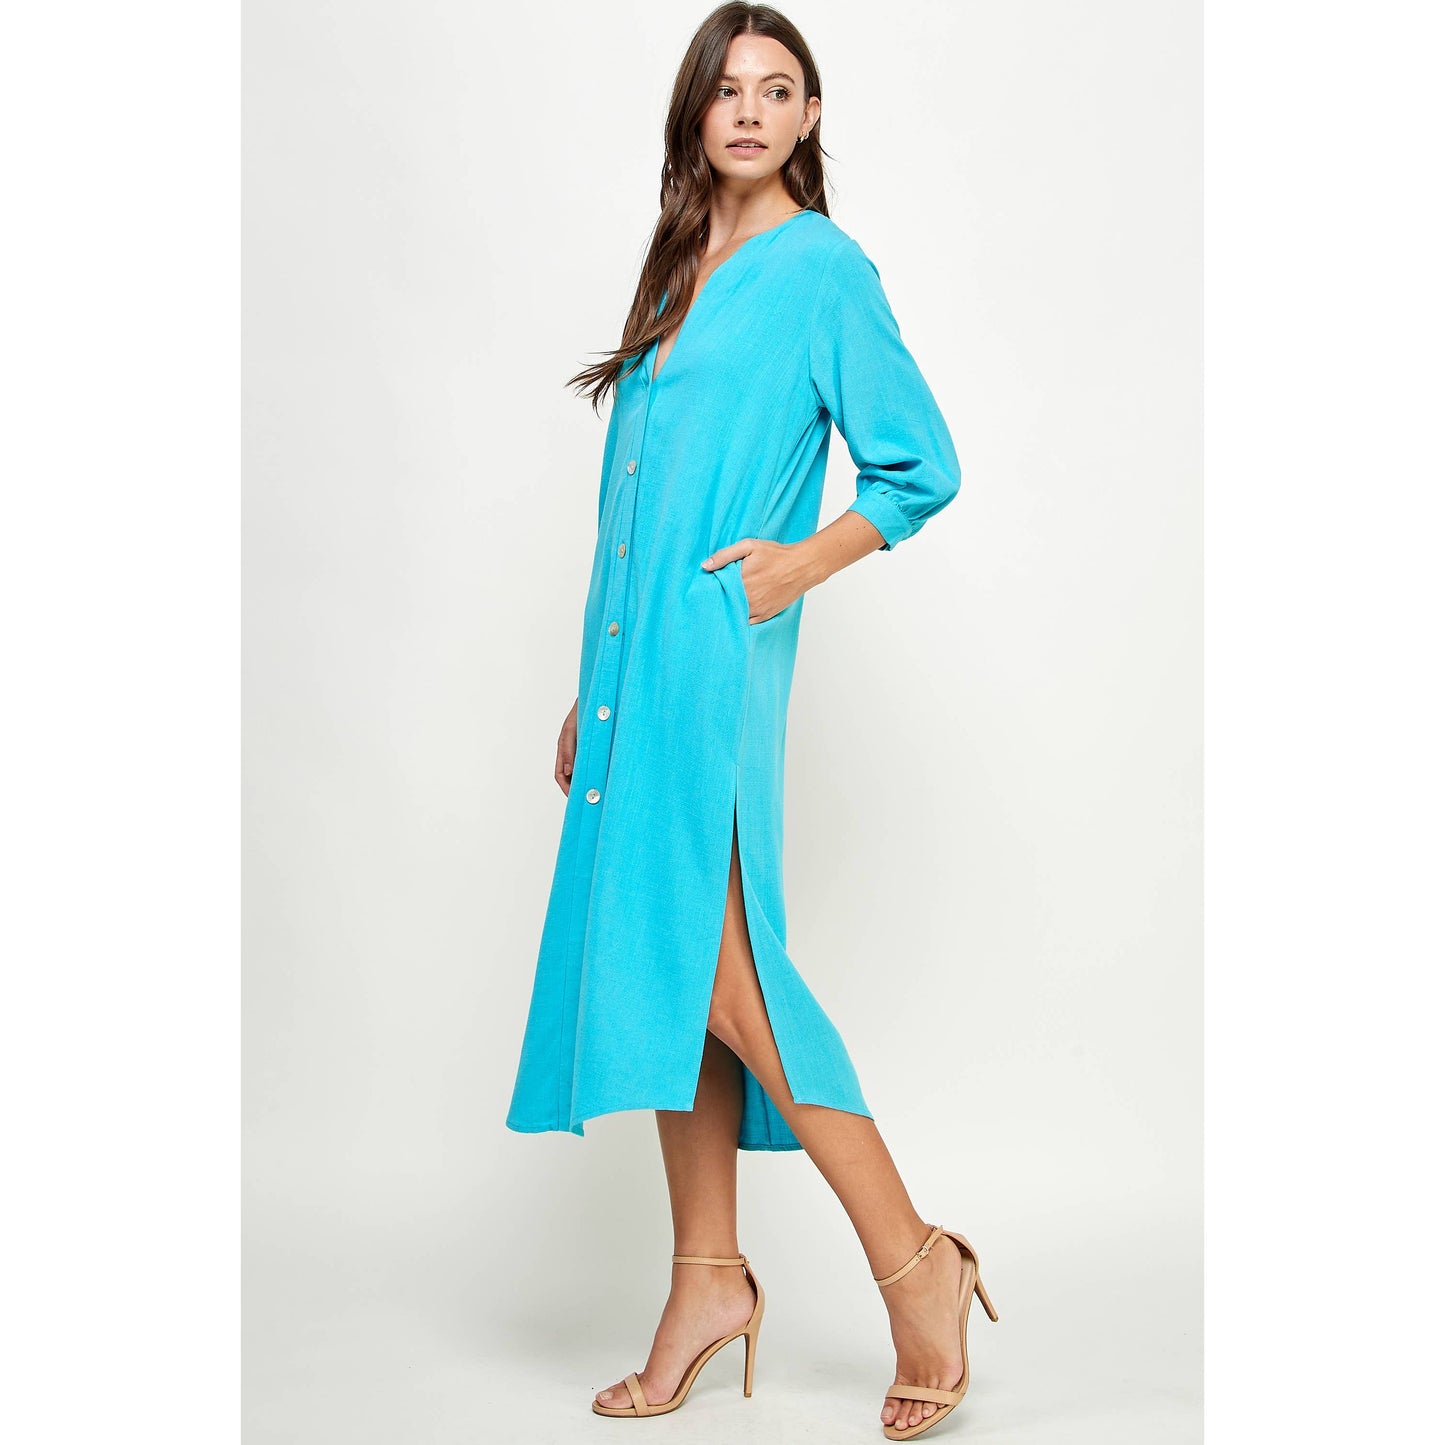 Teal v-neck button down dress with 3/4 sleeves. Dress is mid-calf length